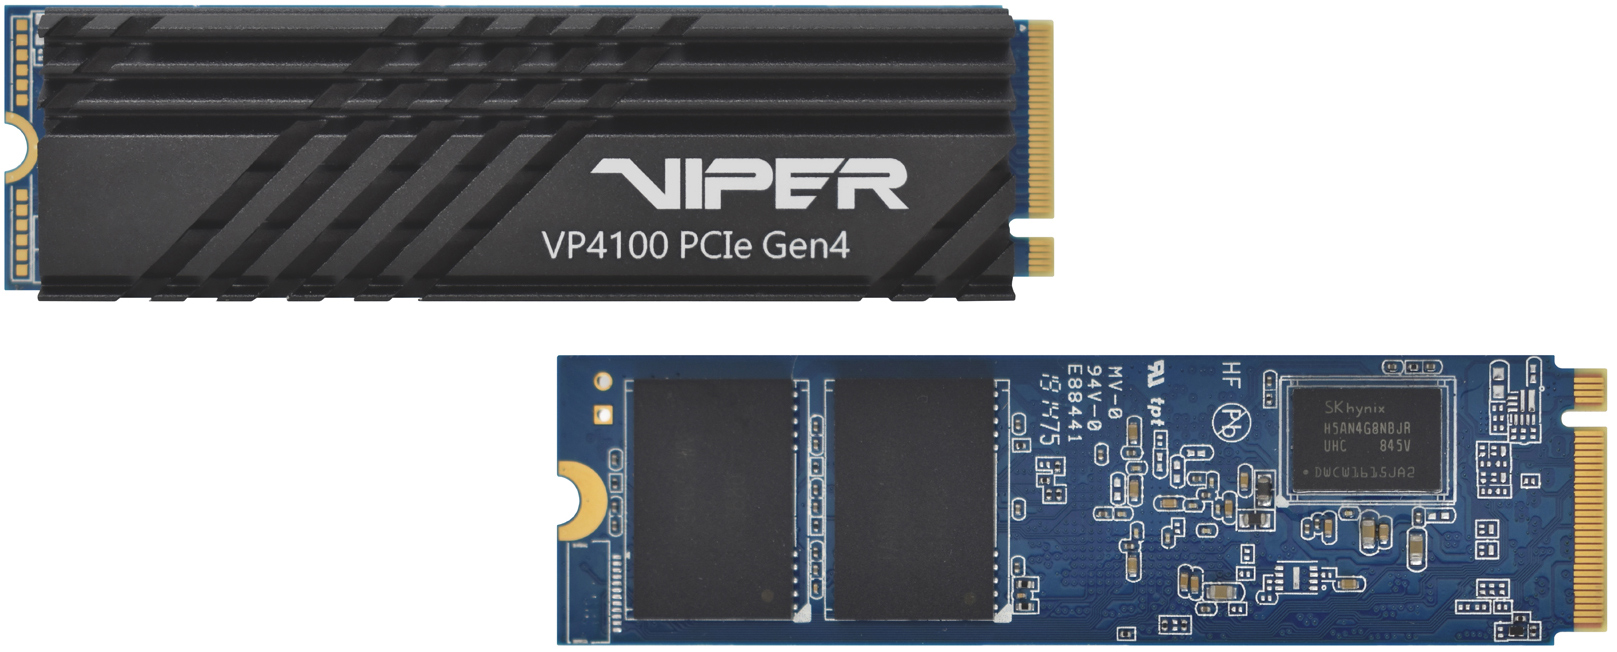 Patriot Launches Viper VP4100 PCIe Gen 4 SSDs: Up to 5 GB/s